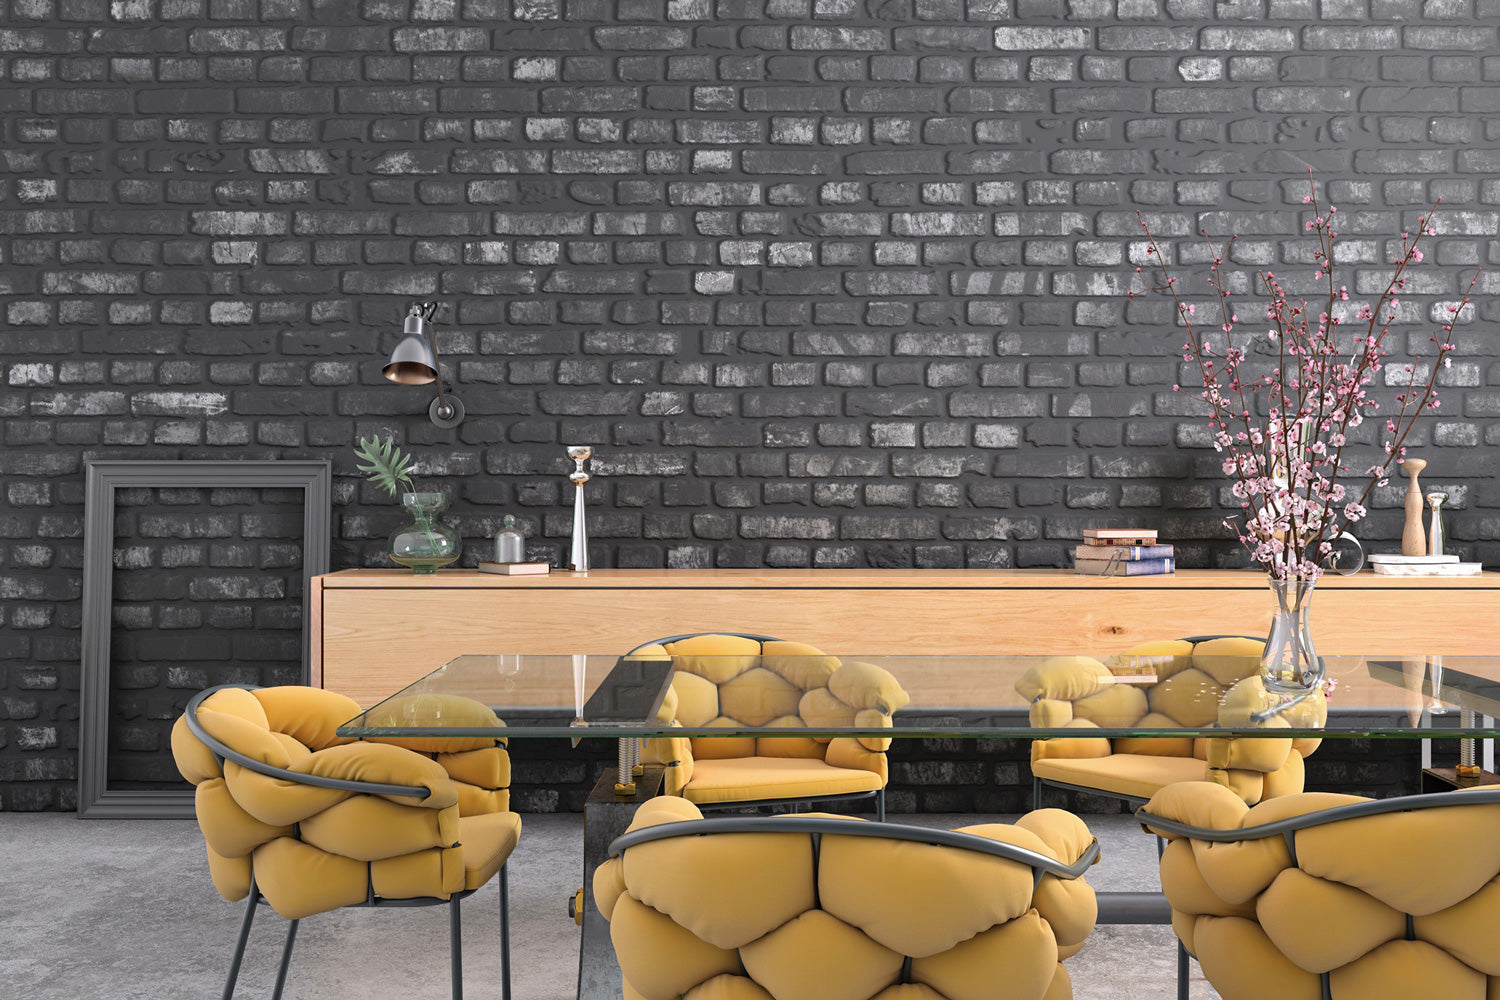 Rectangle clear glass table with five chairs fitted with honeycomb style yellow cushions and a black brick background